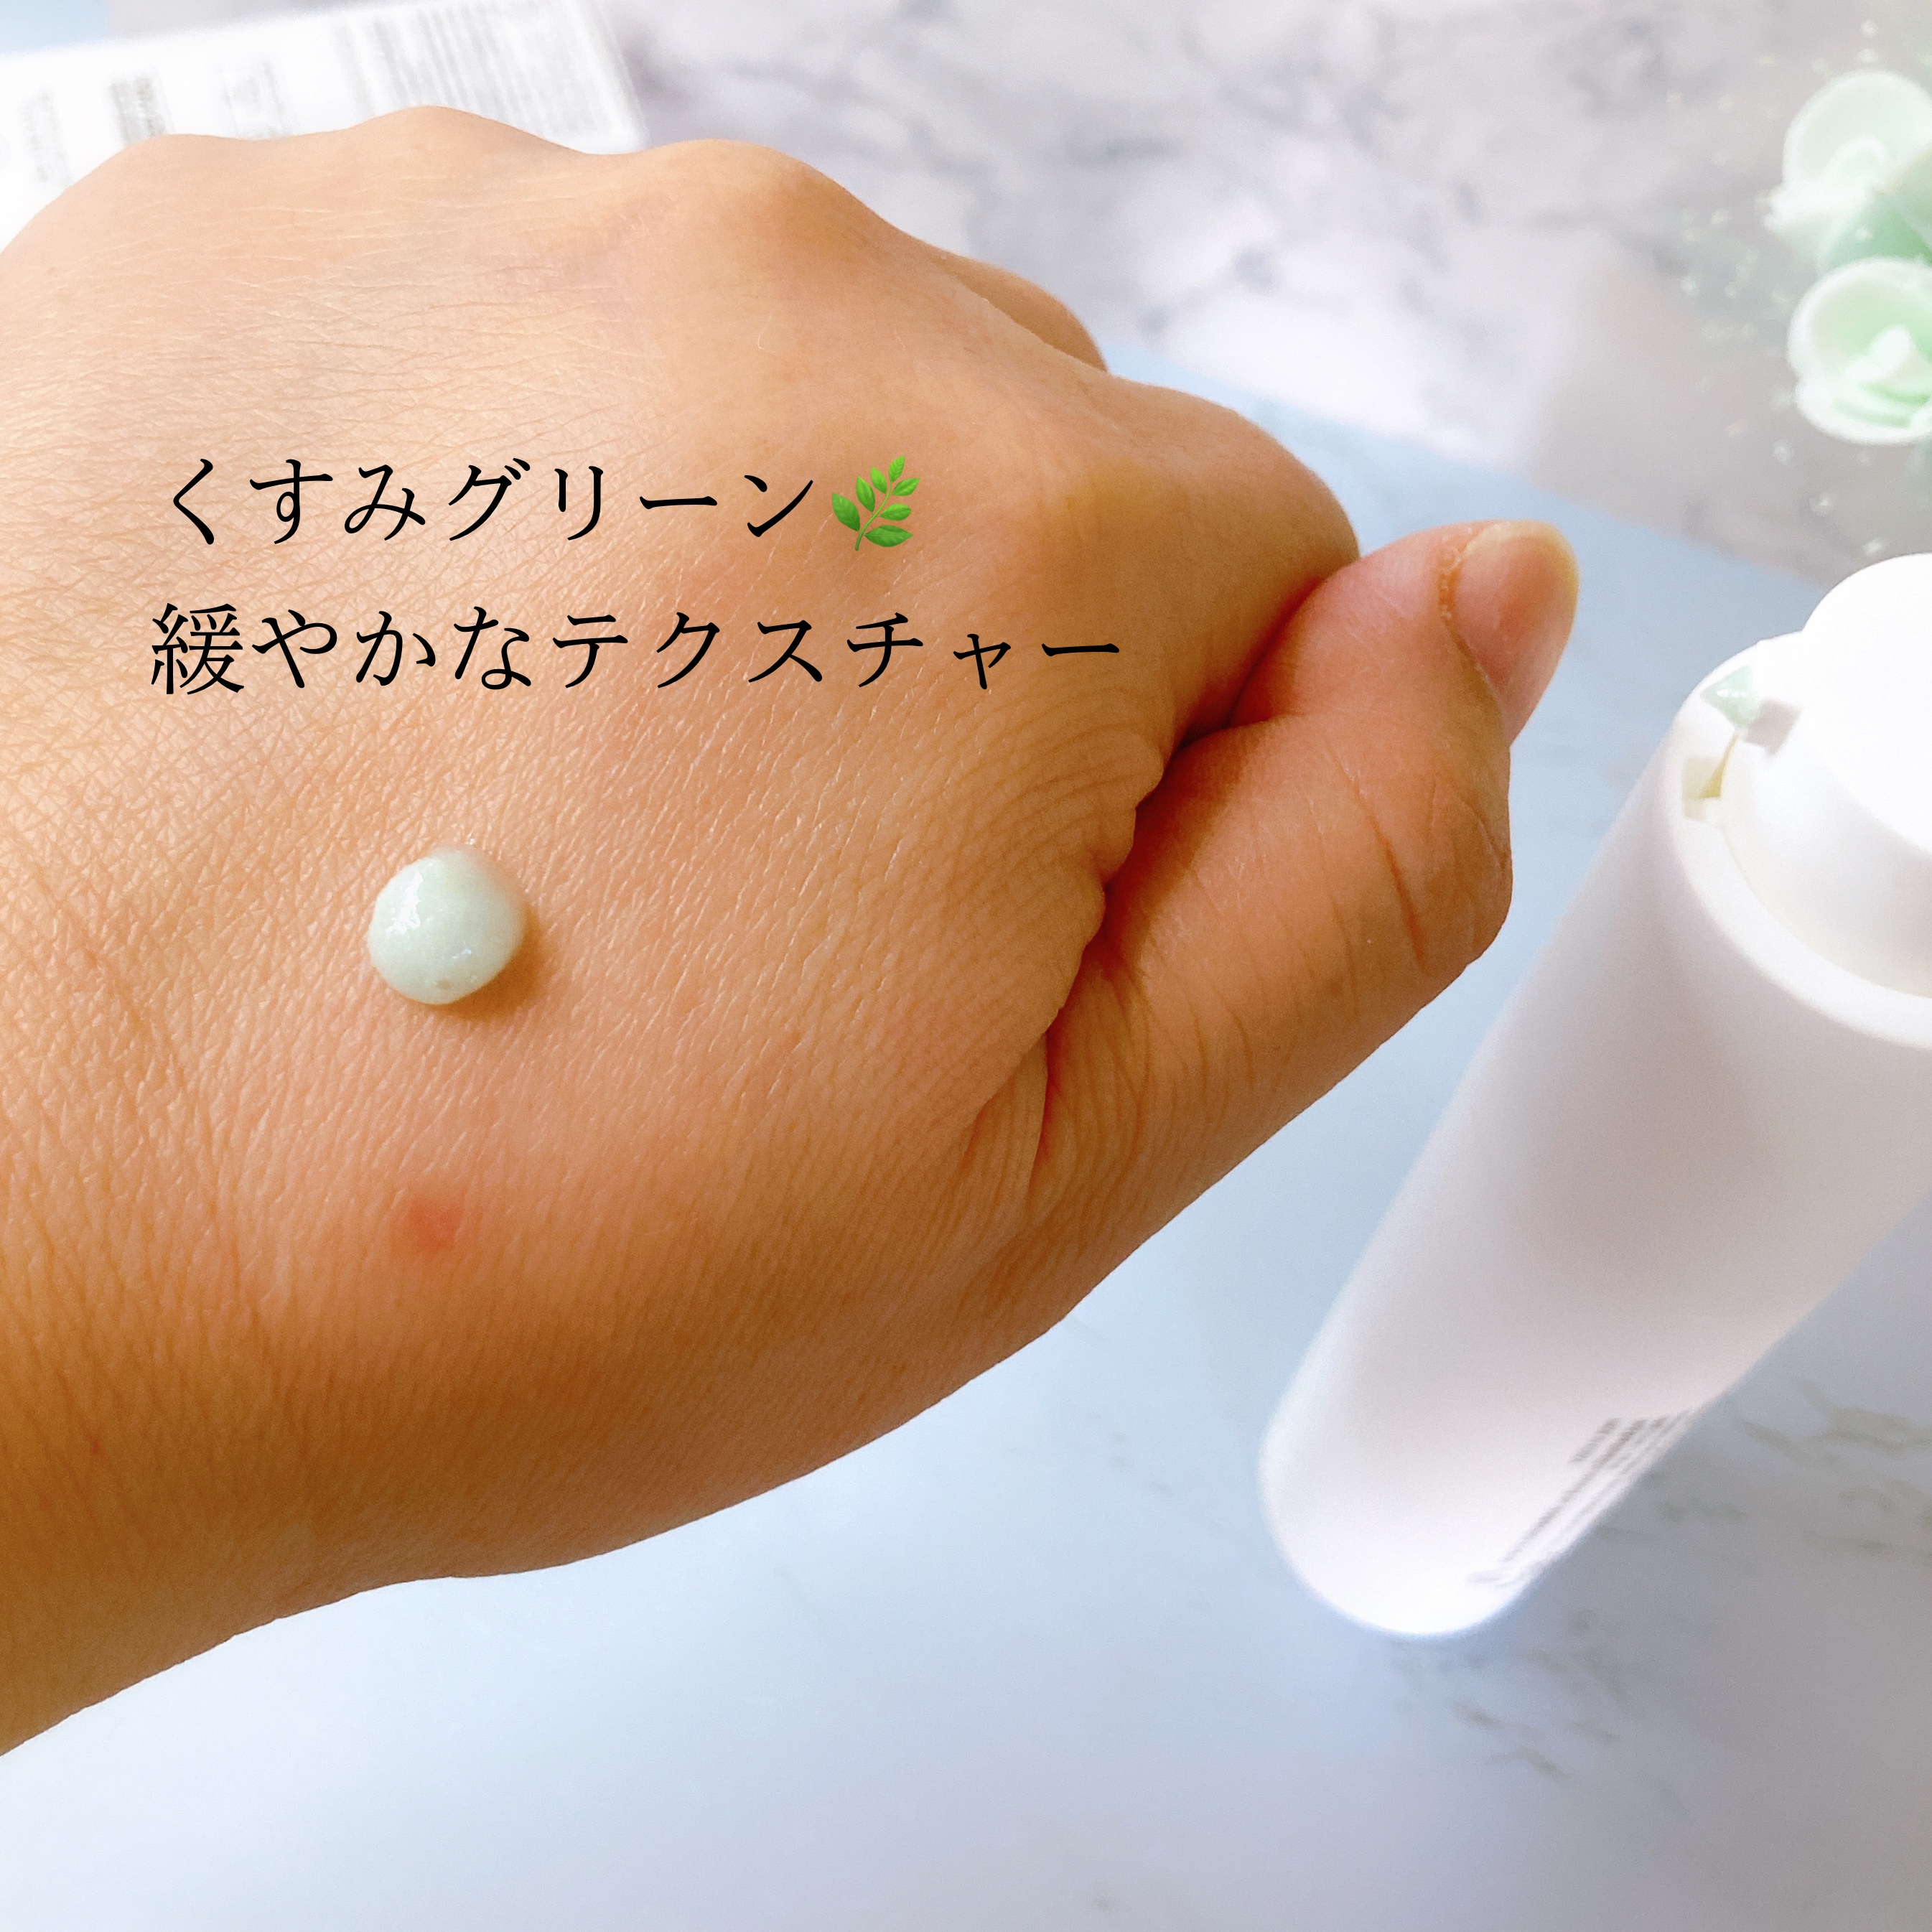 Dr.althea
CICA RELIEF SUN ESSENCEを使ったメグさんのクチコミ画像3